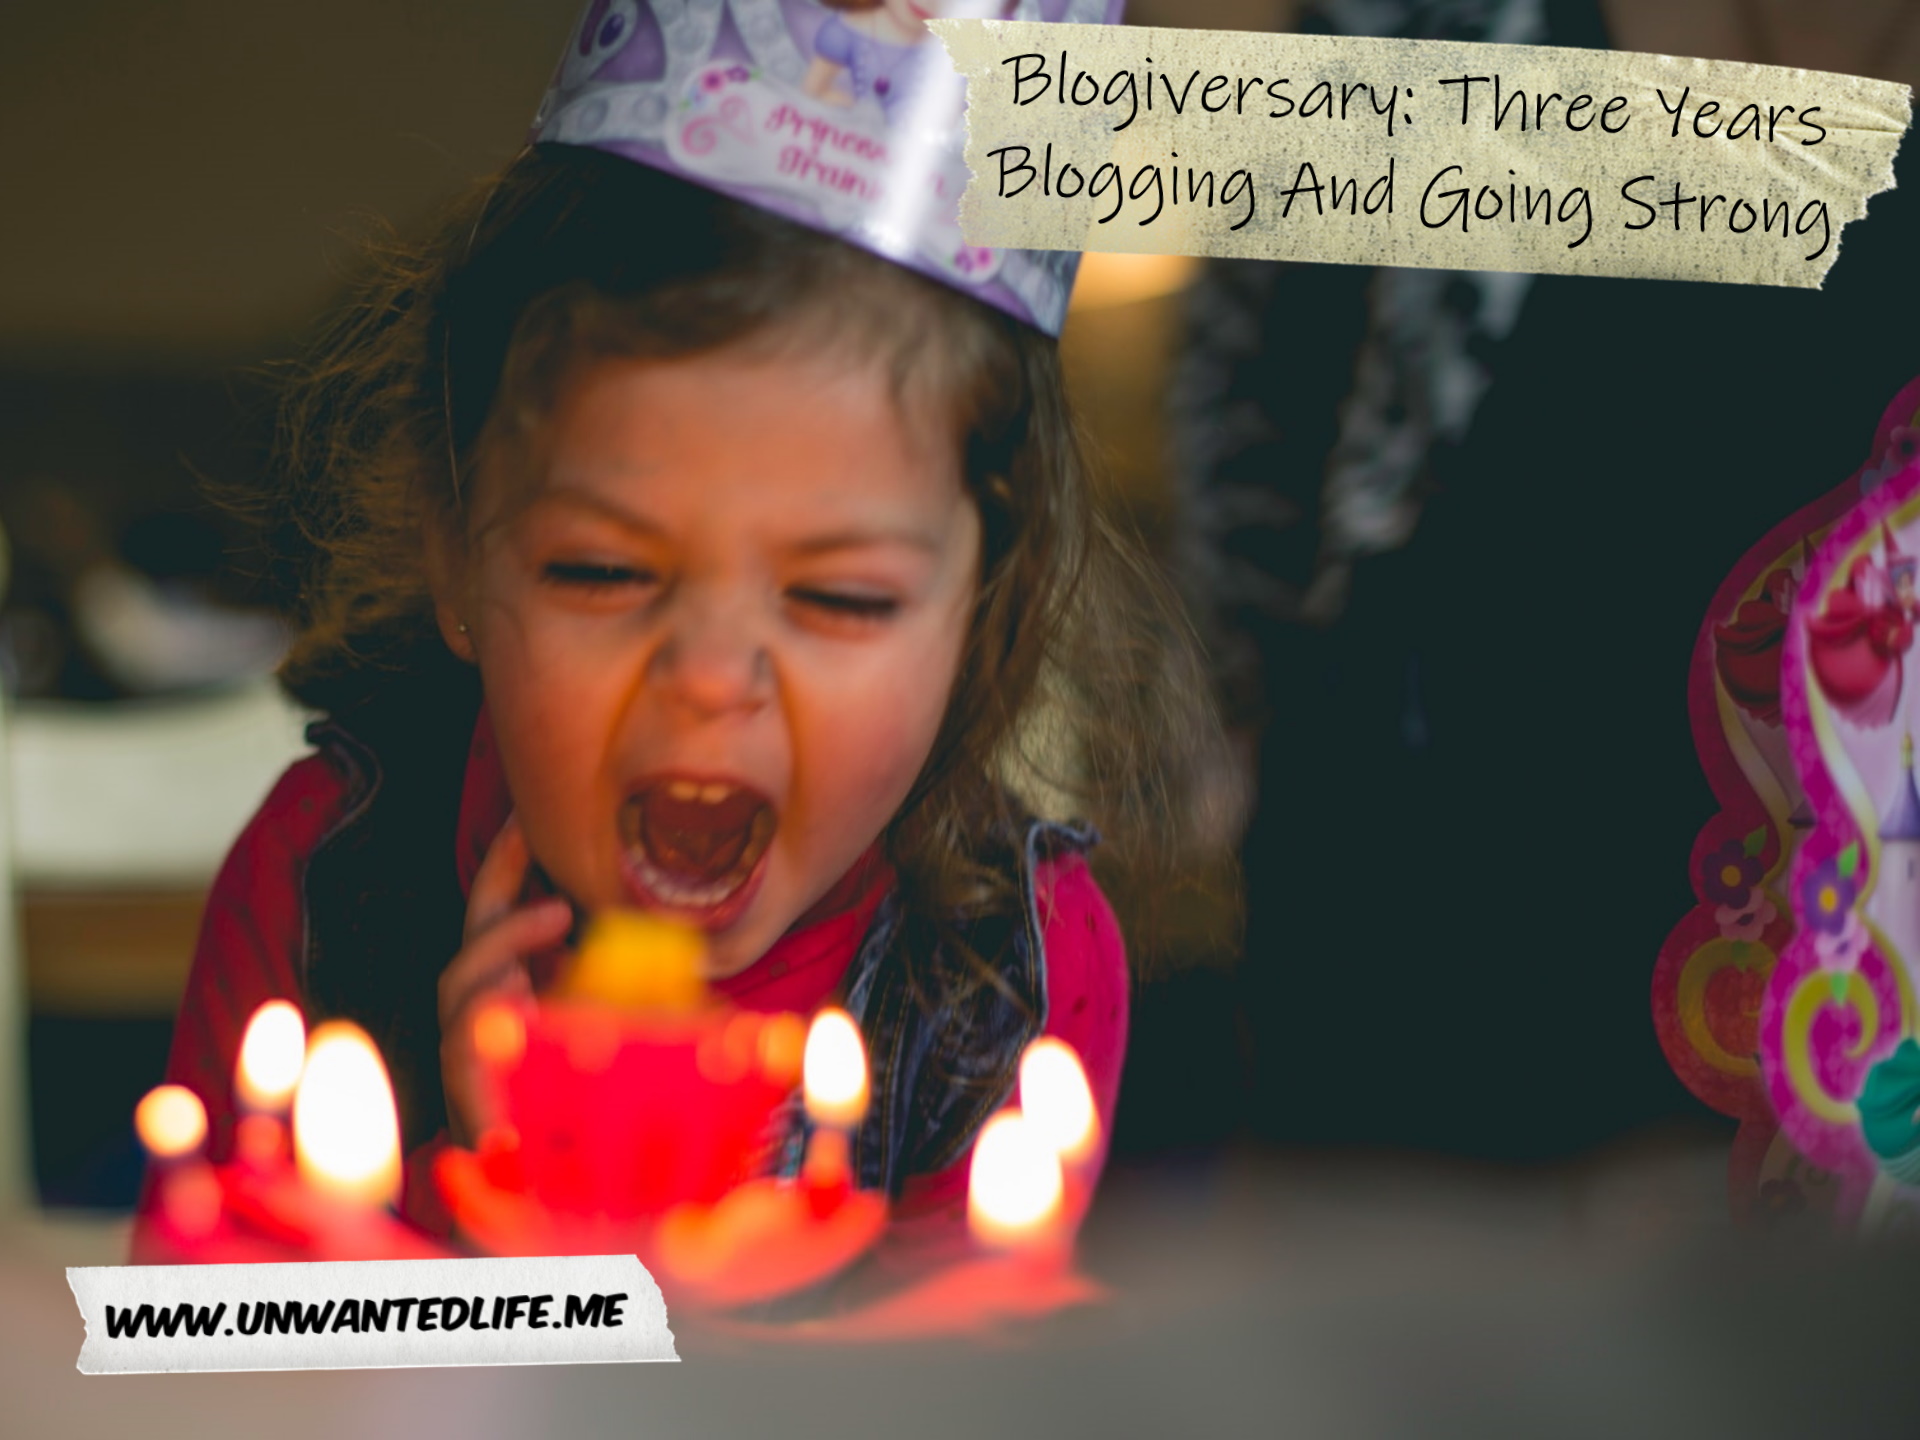 A white child enthusiastically blowing out candles on a cake while wearing a birthday hat to represent the topic of the article - Blogiversary: Three Years Blogging And Going Strong